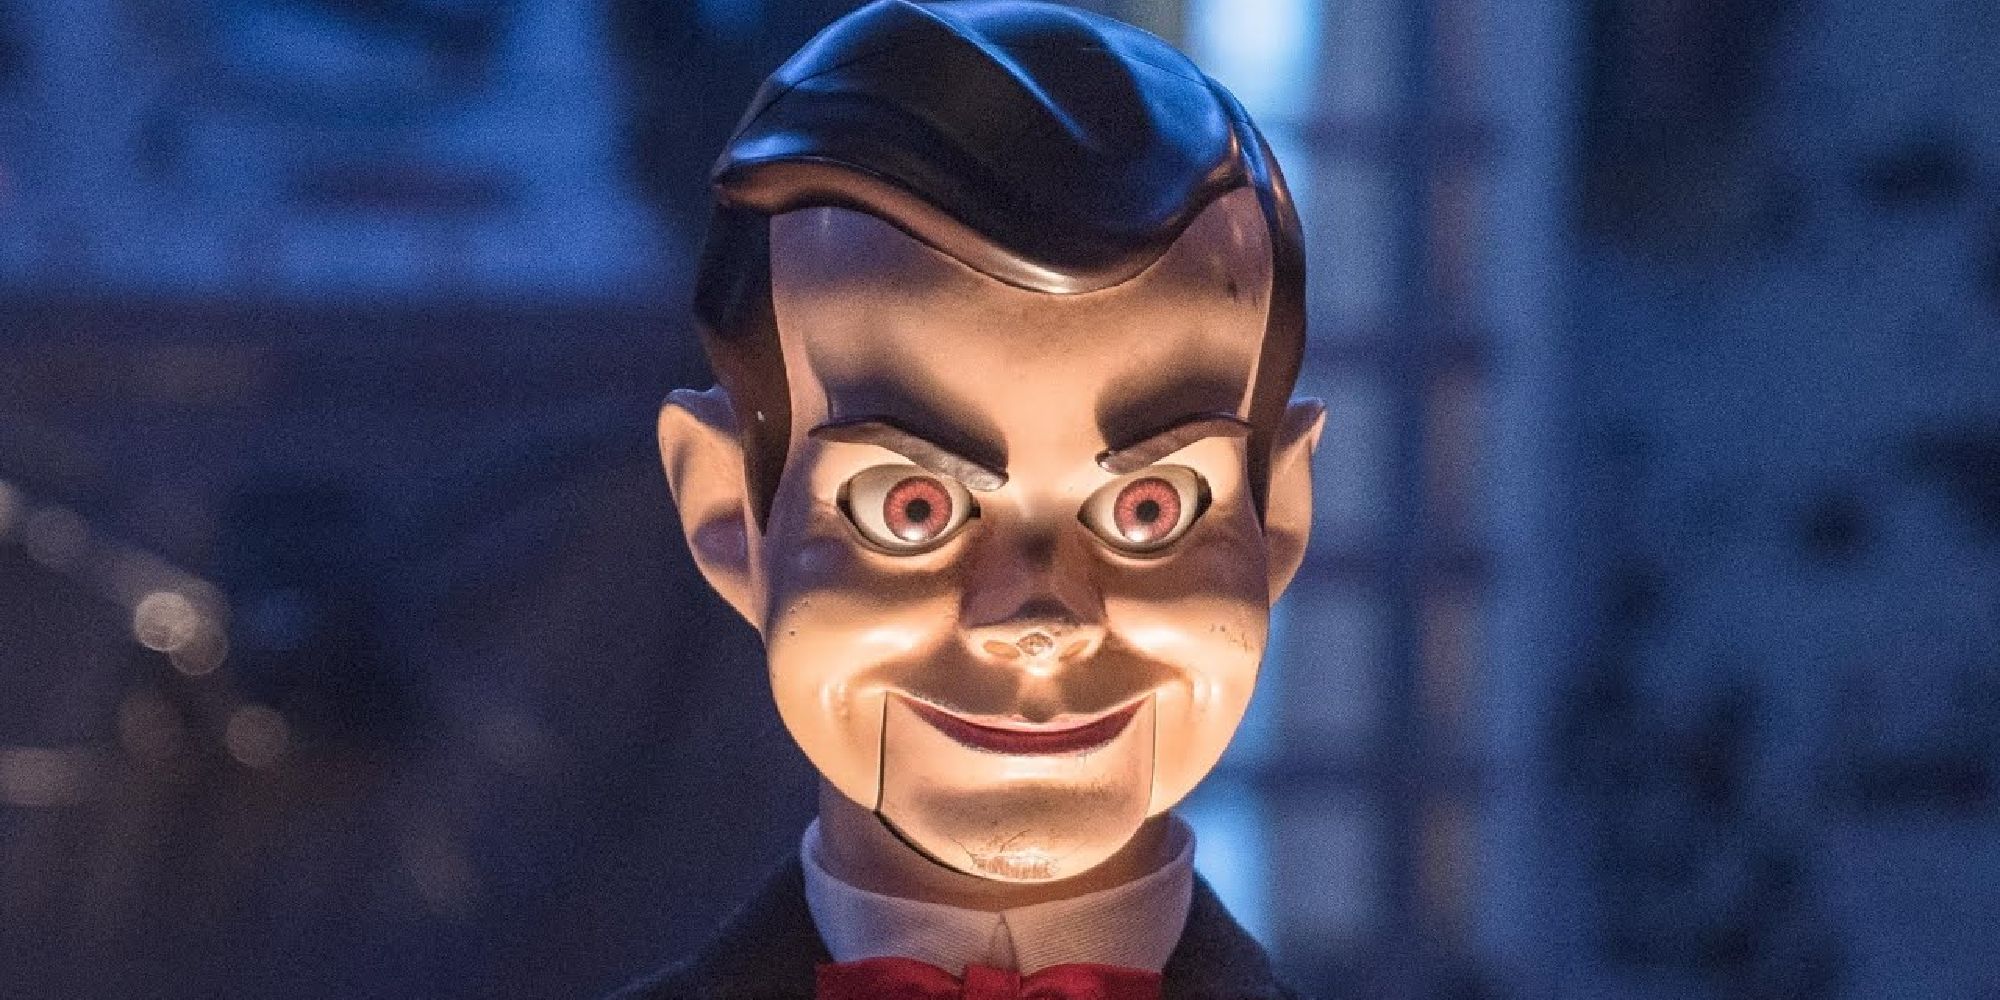 Slappy the ventriloquist doll from the Goosebumps movie.